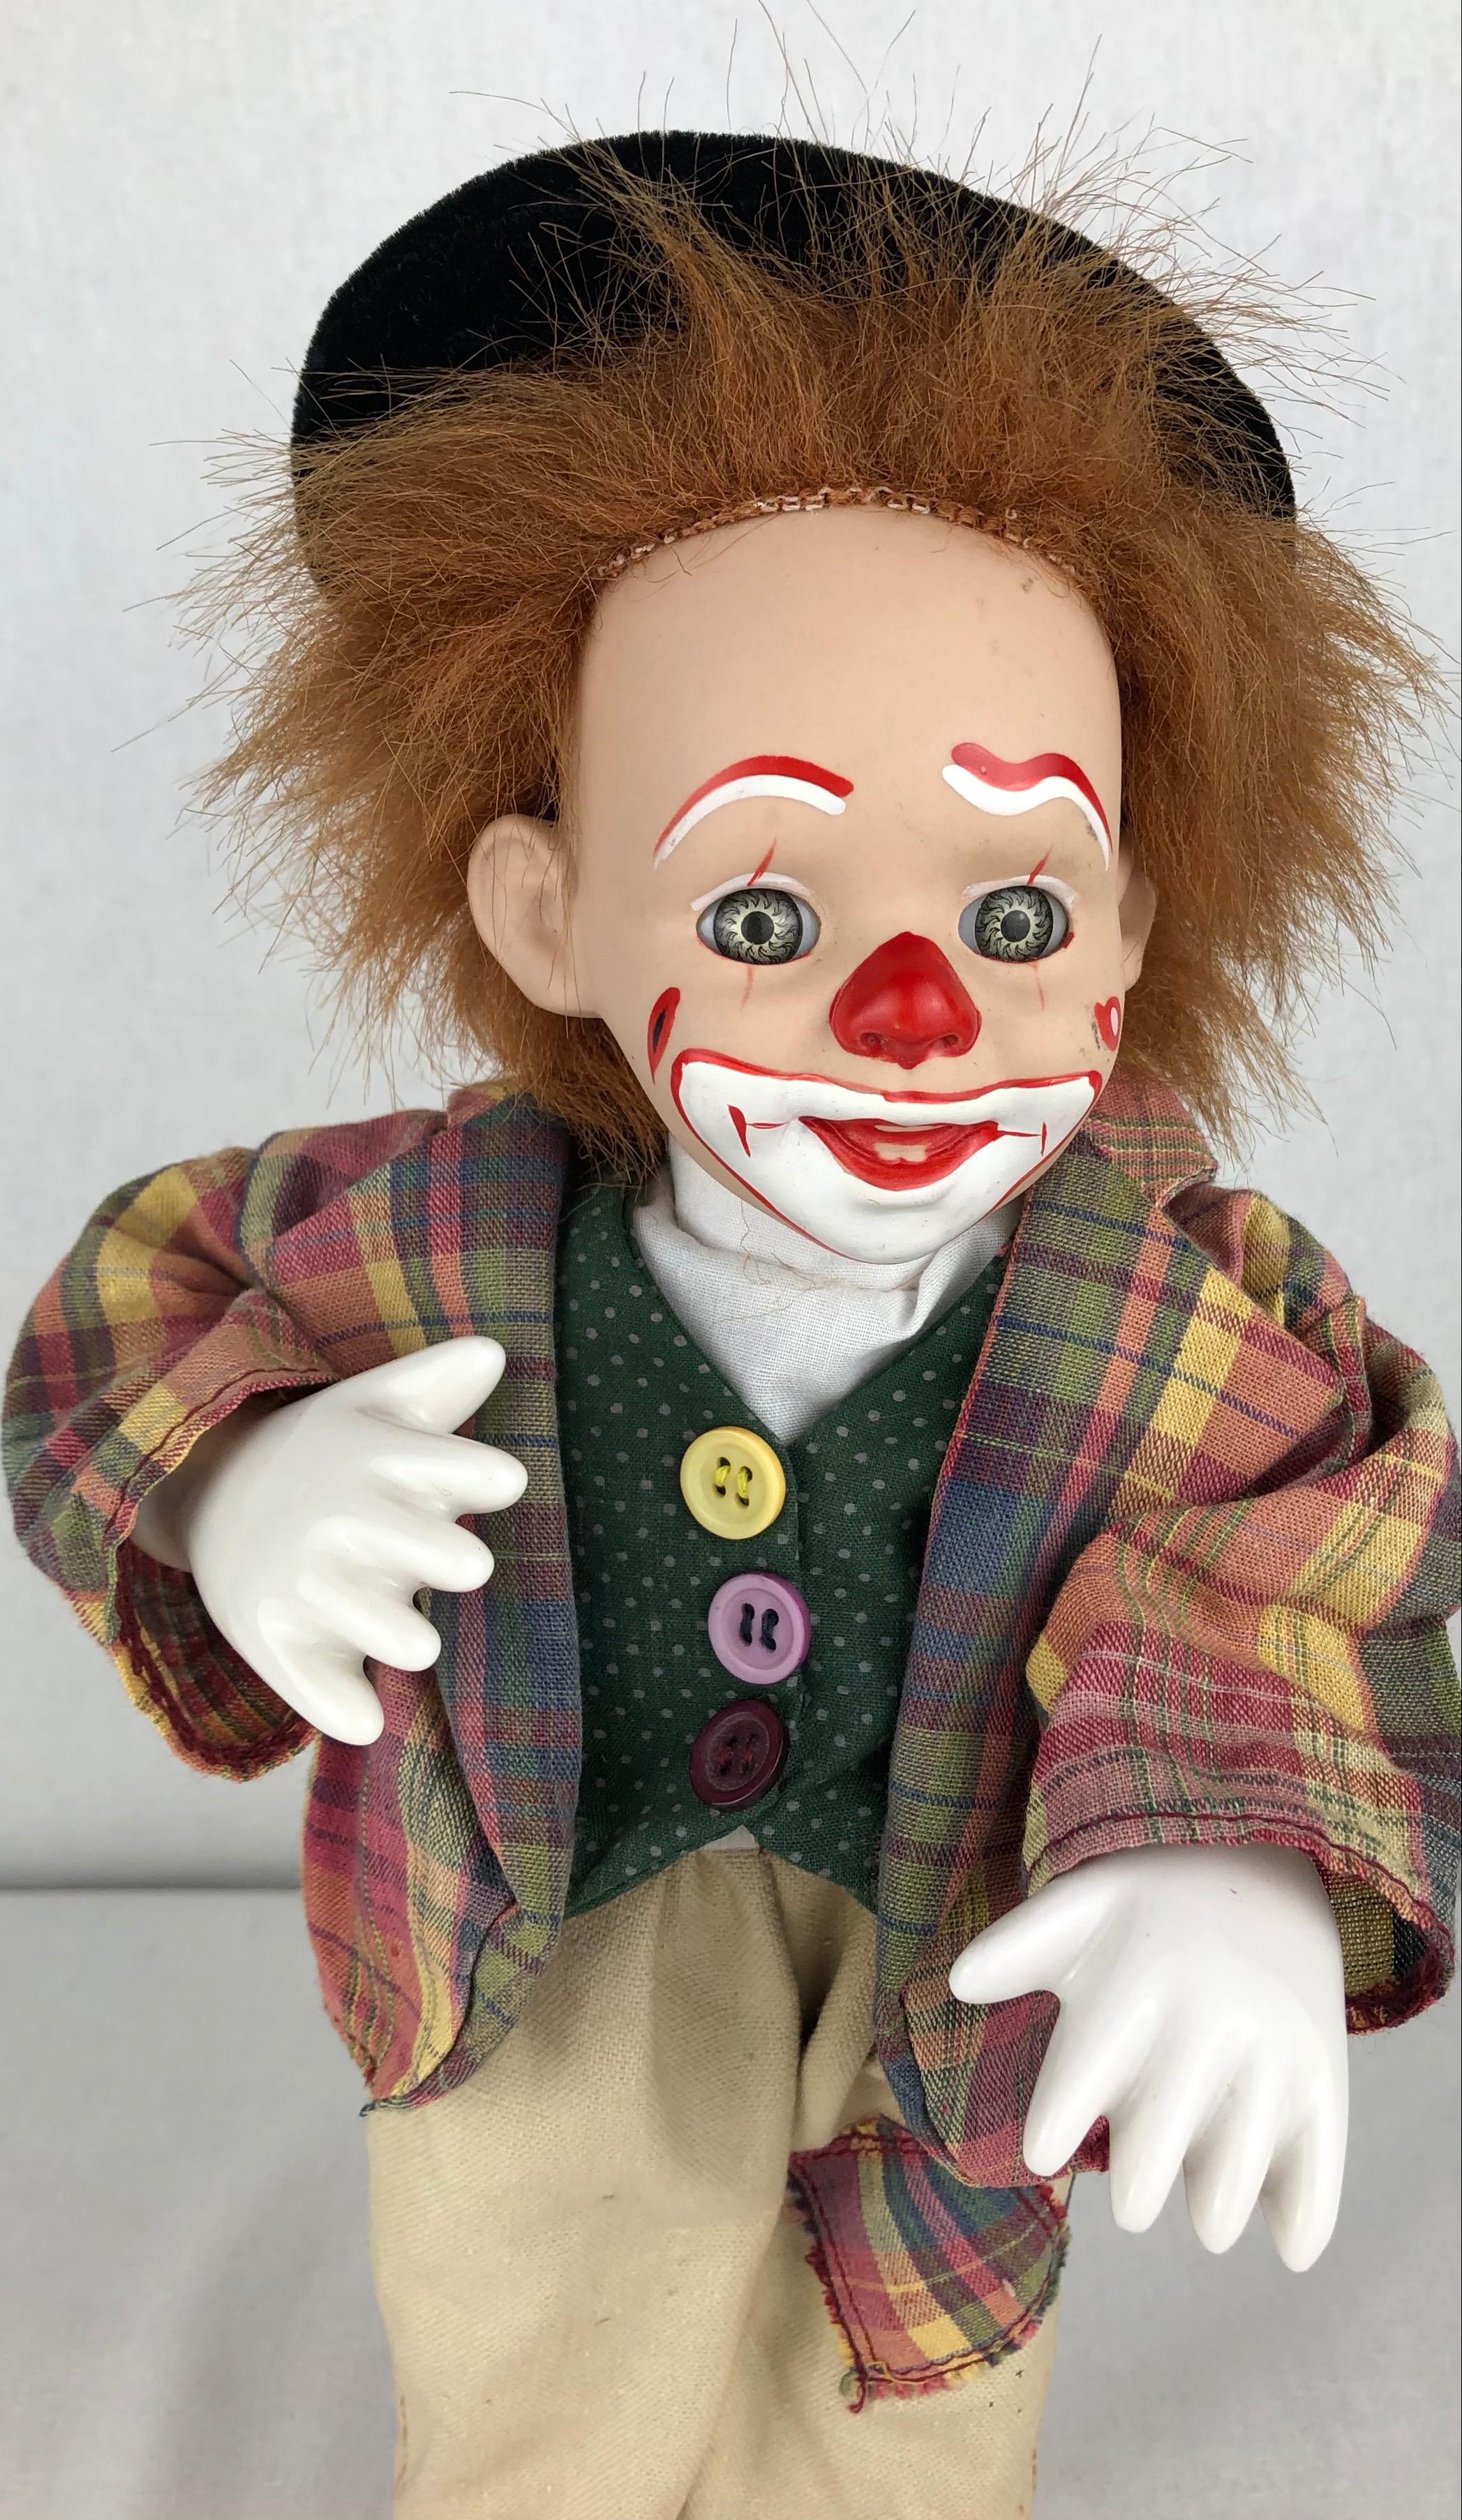 A fine quality therapeutic musical automaton clown toy in wonderful vintage condition.
Features porcelain head, hands and feet.
Made in France during the 1950s and is in perfect working condition.

Measures: 5 7/8